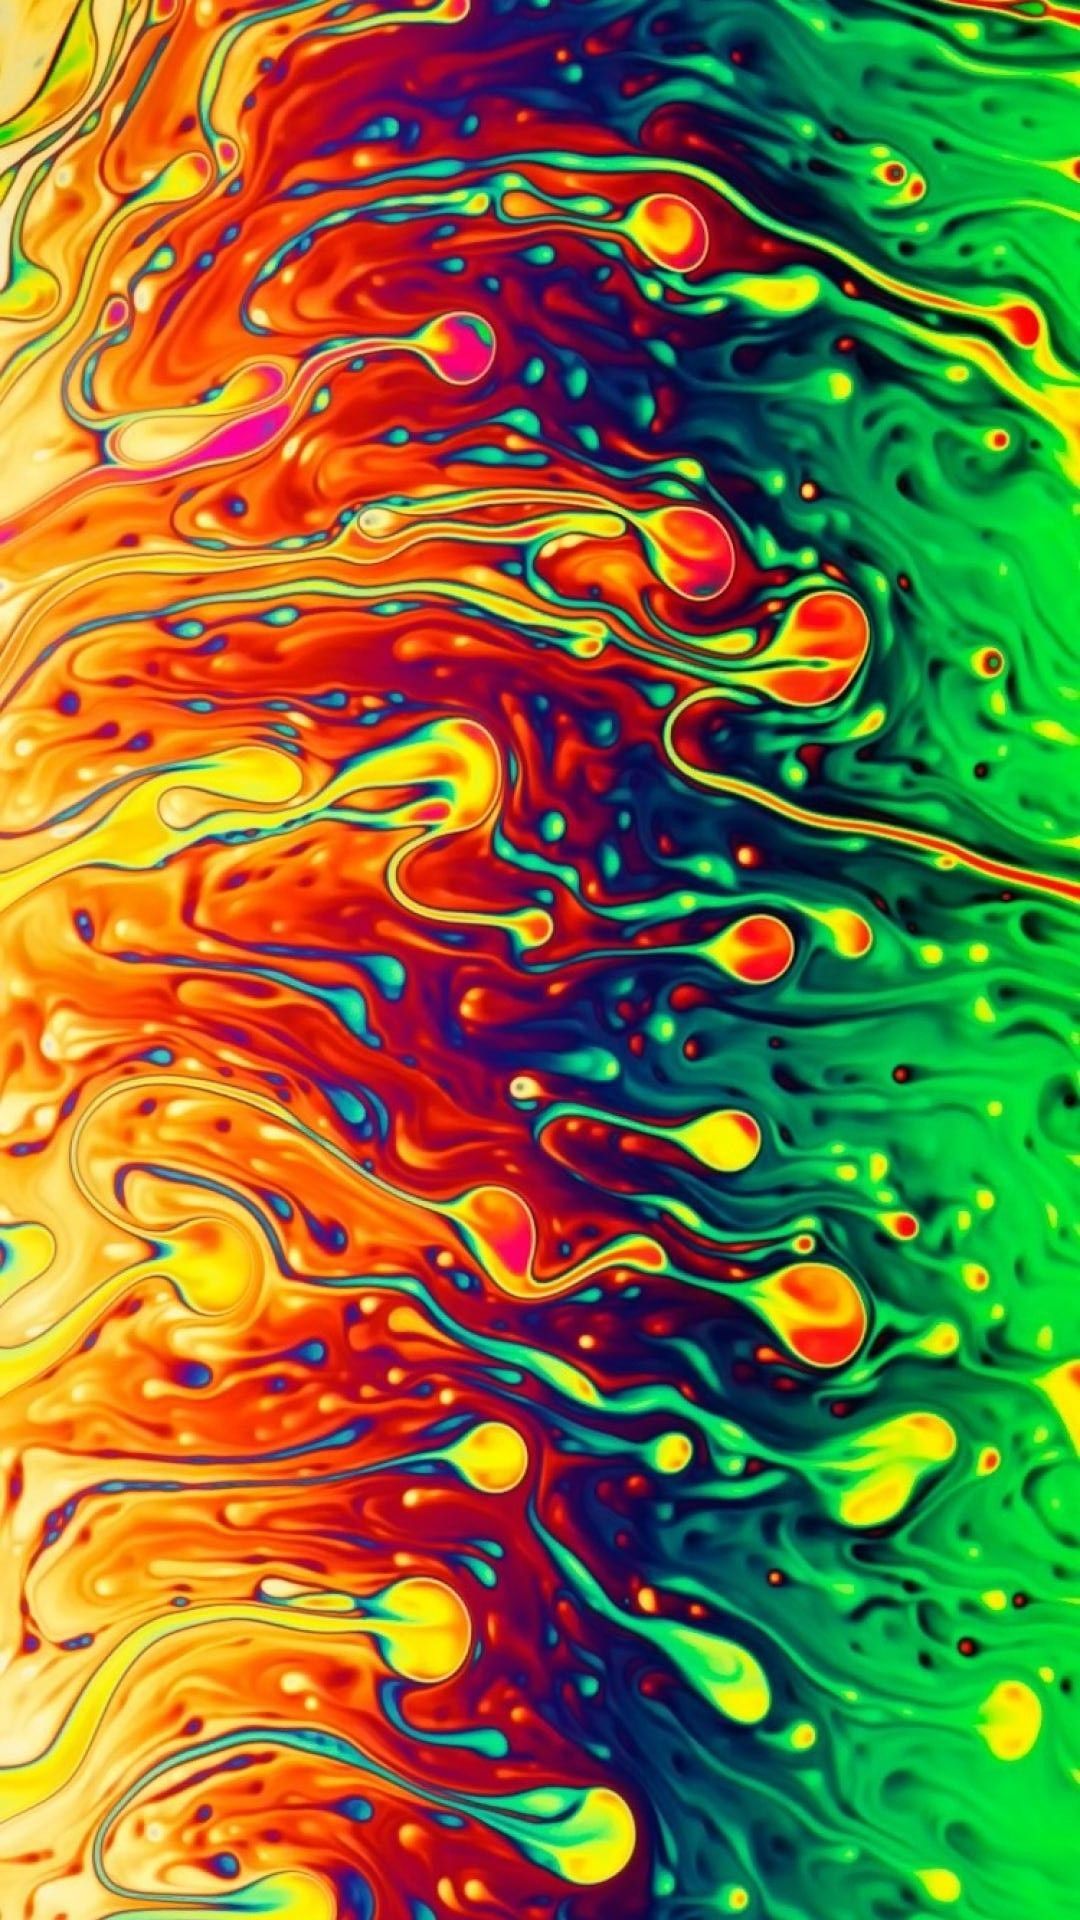 Abstract Liquid Wallpaper Iphone - Trippy Wallpaper Iphone Xr , HD Wallpaper & Backgrounds